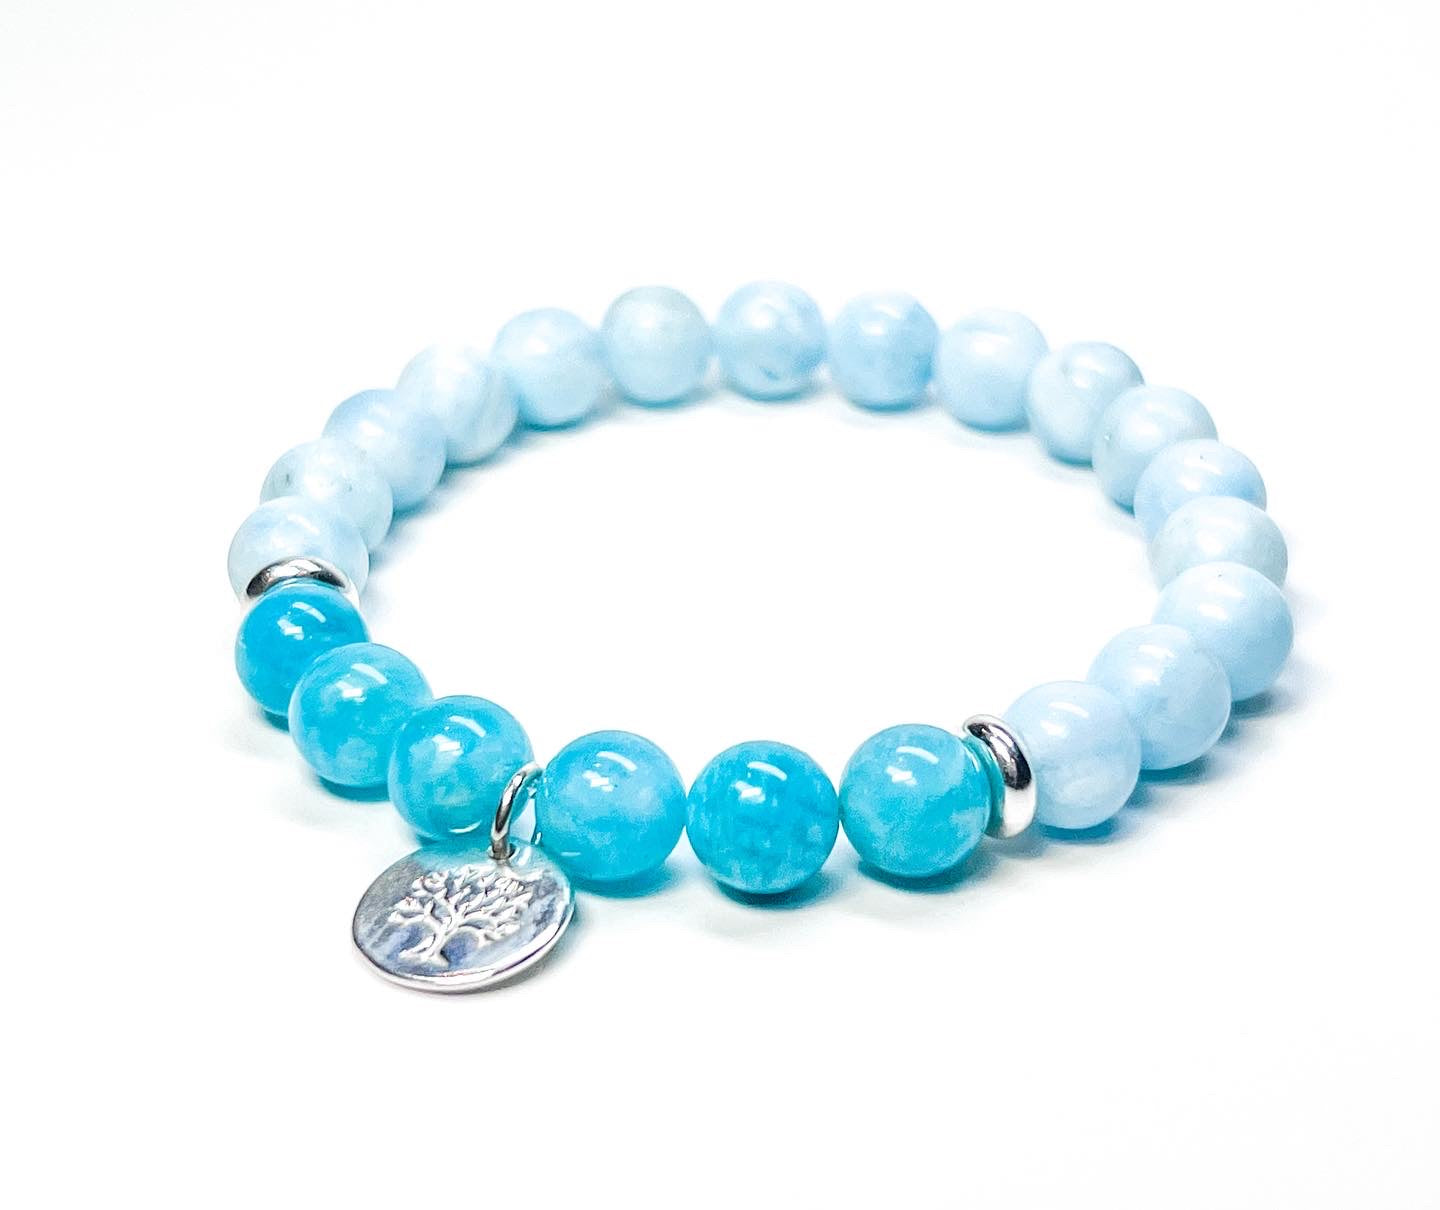 Hemimorphite and Russian Amazonite tree of life mala in sterling silver